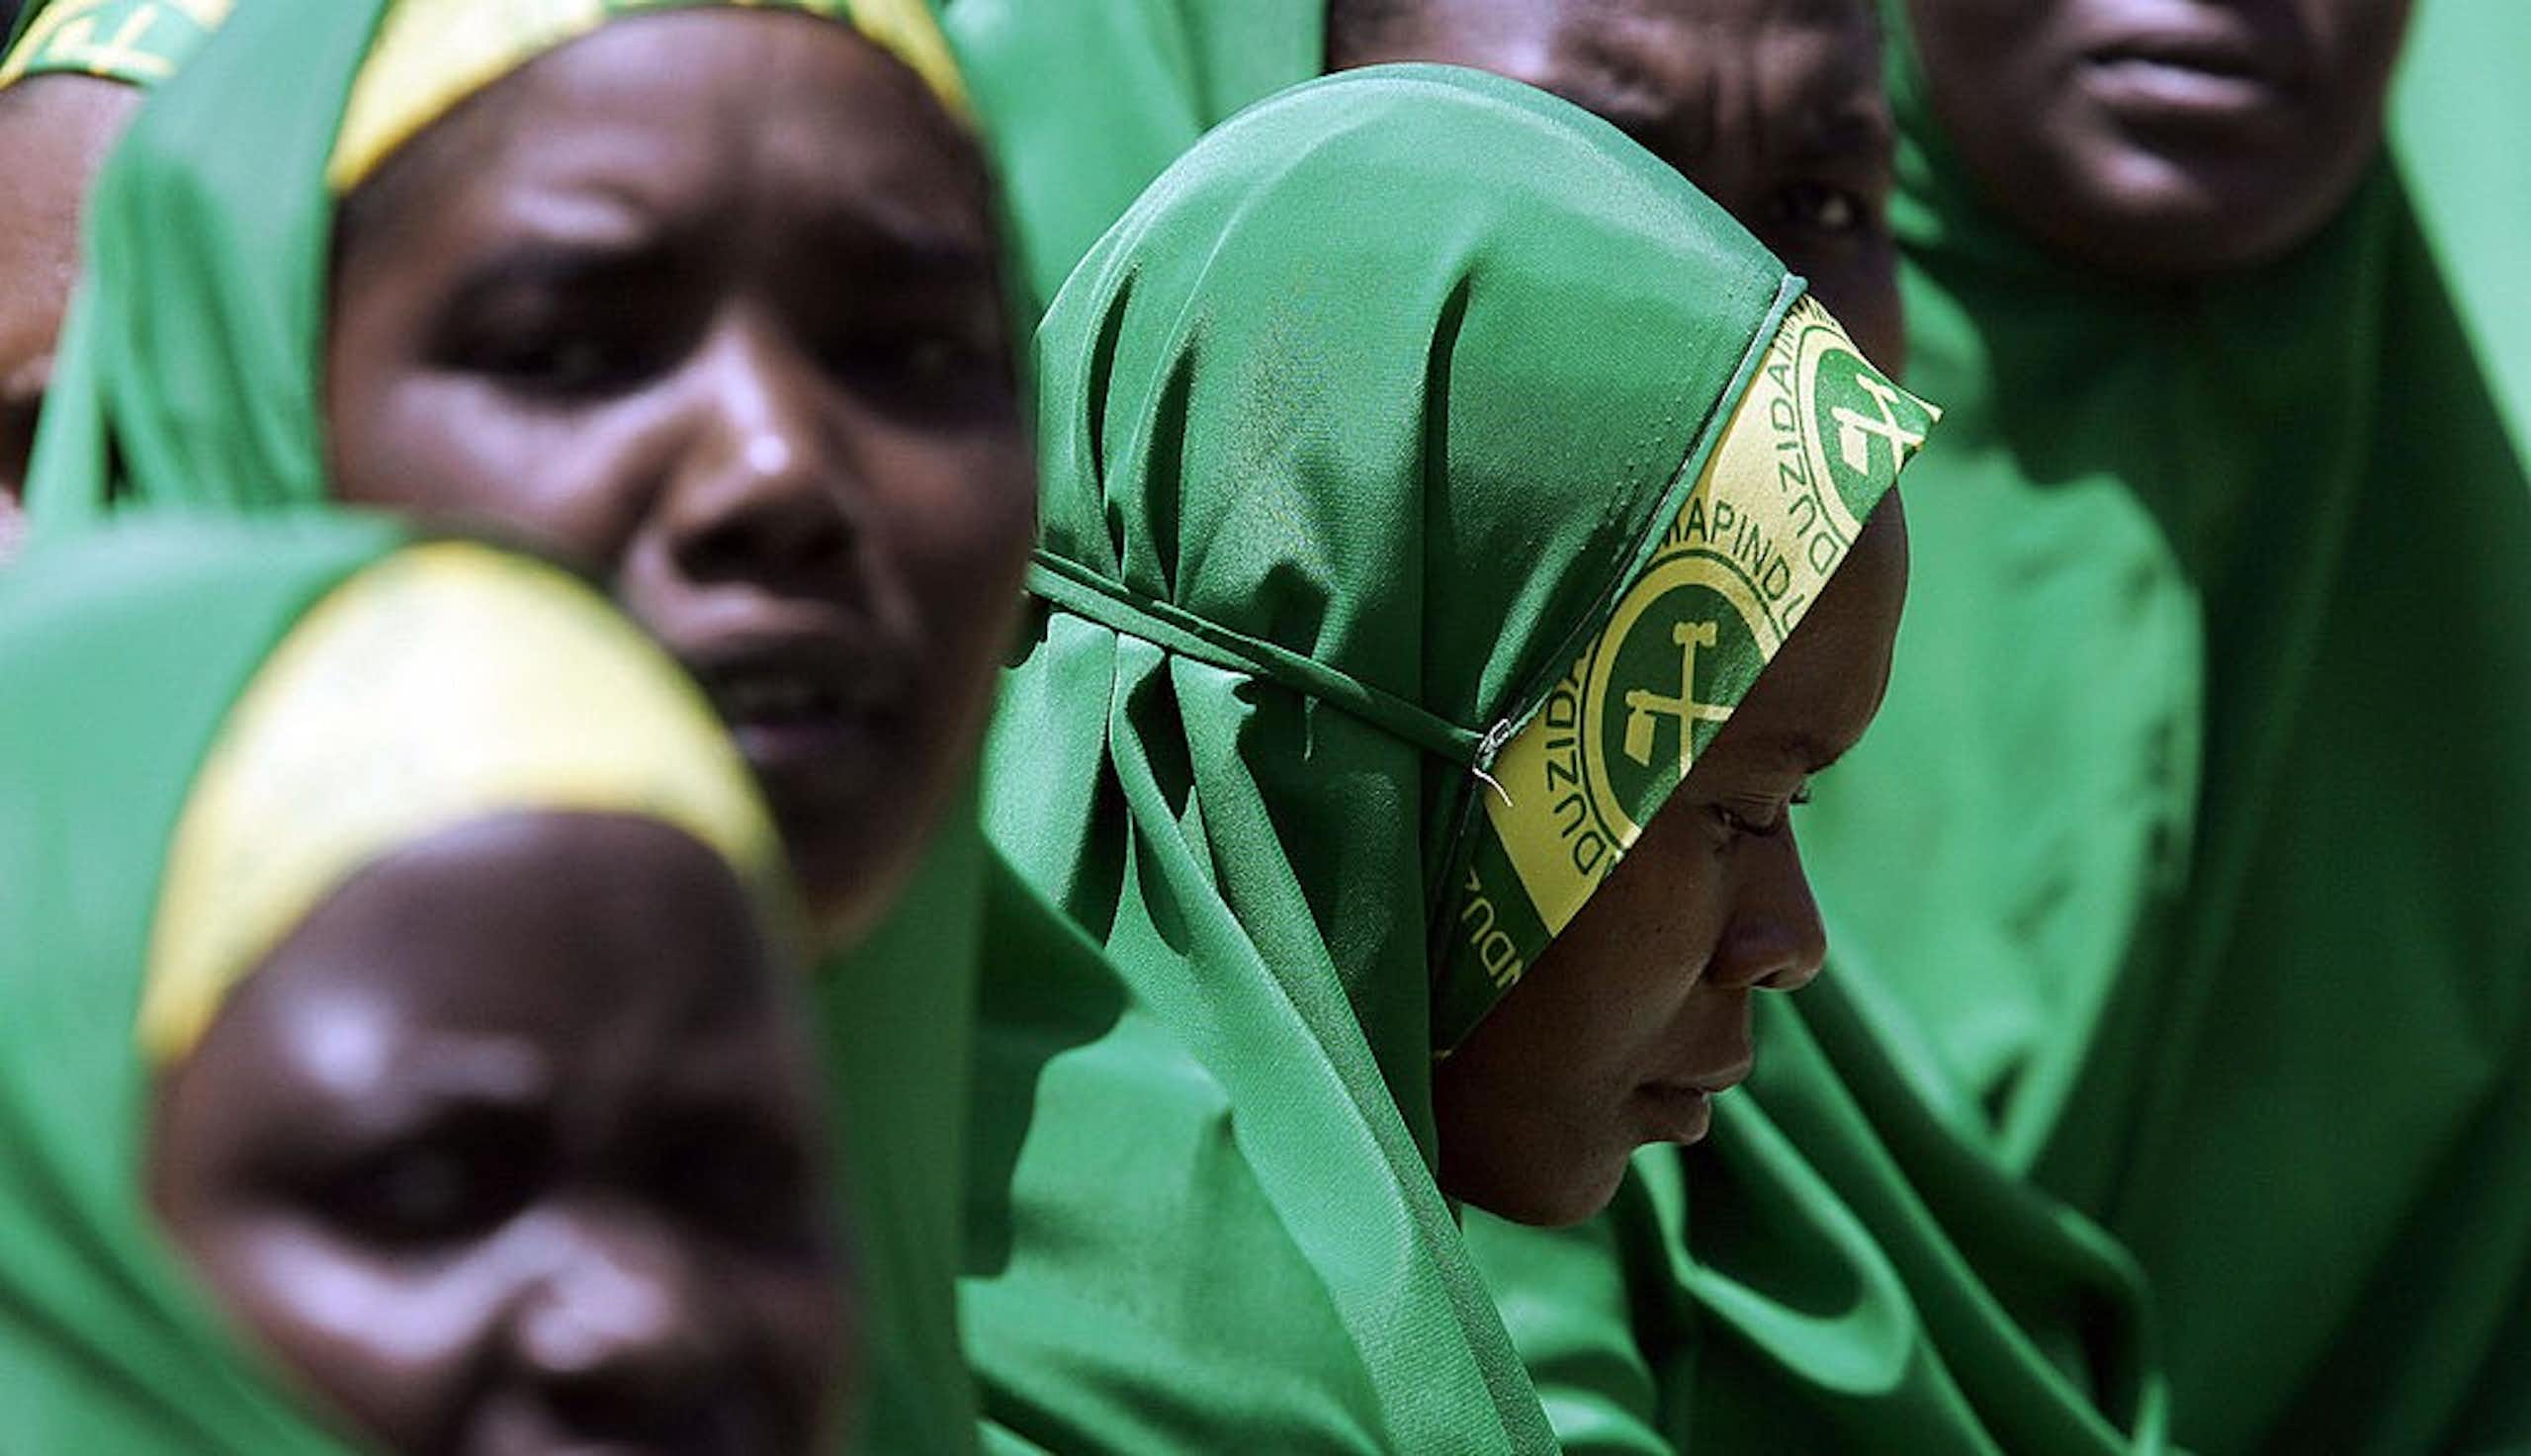 Tanzania’s political parties have few women in leadership and candidate lists: some solutions